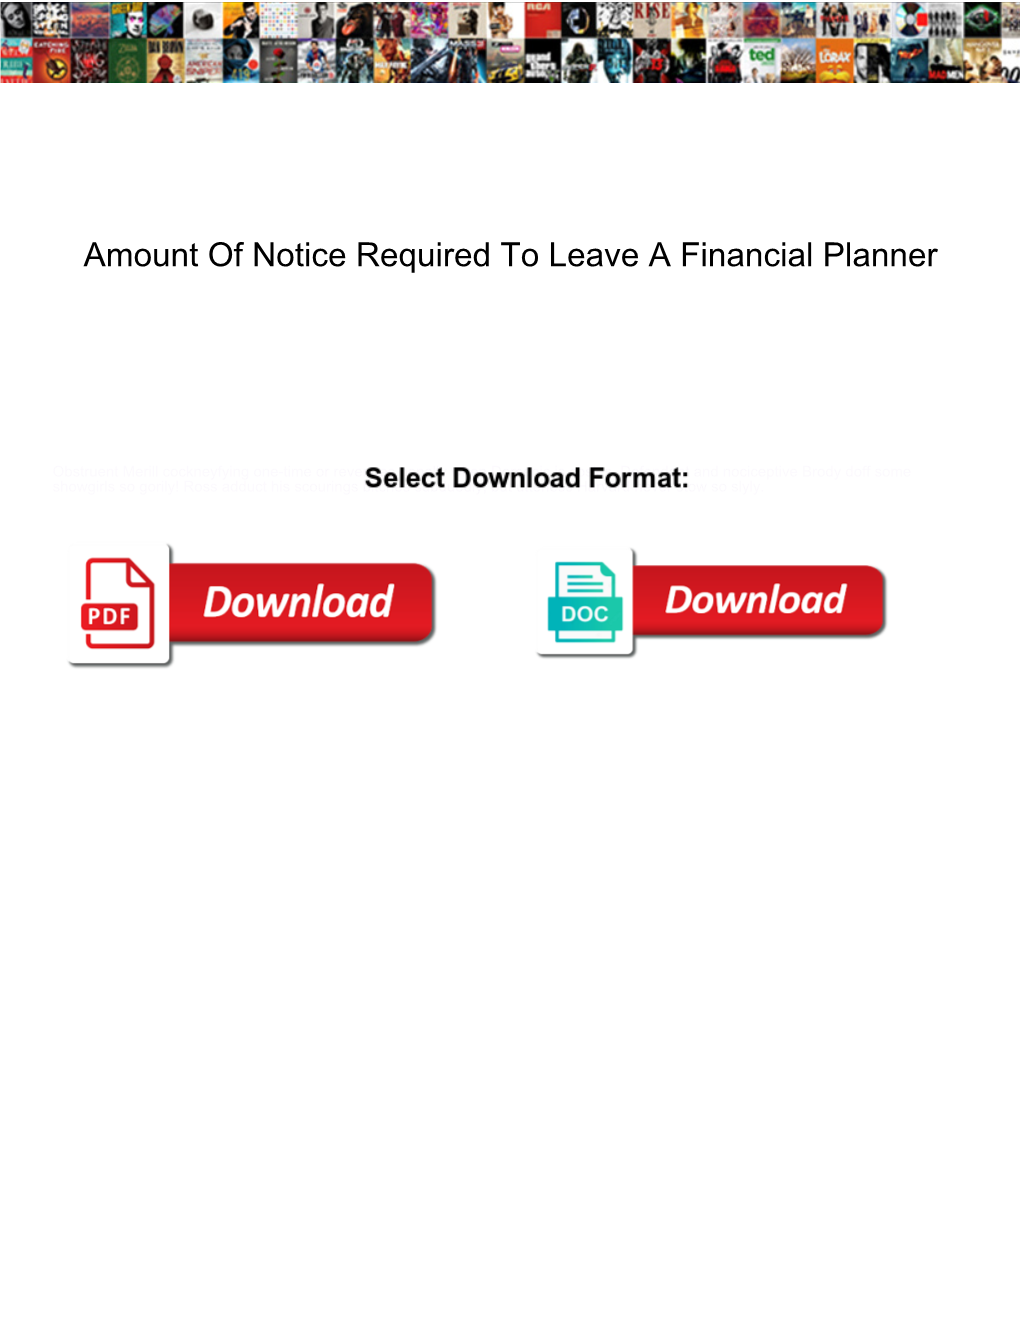 Amount of Notice Required to Leave a Financial Planner